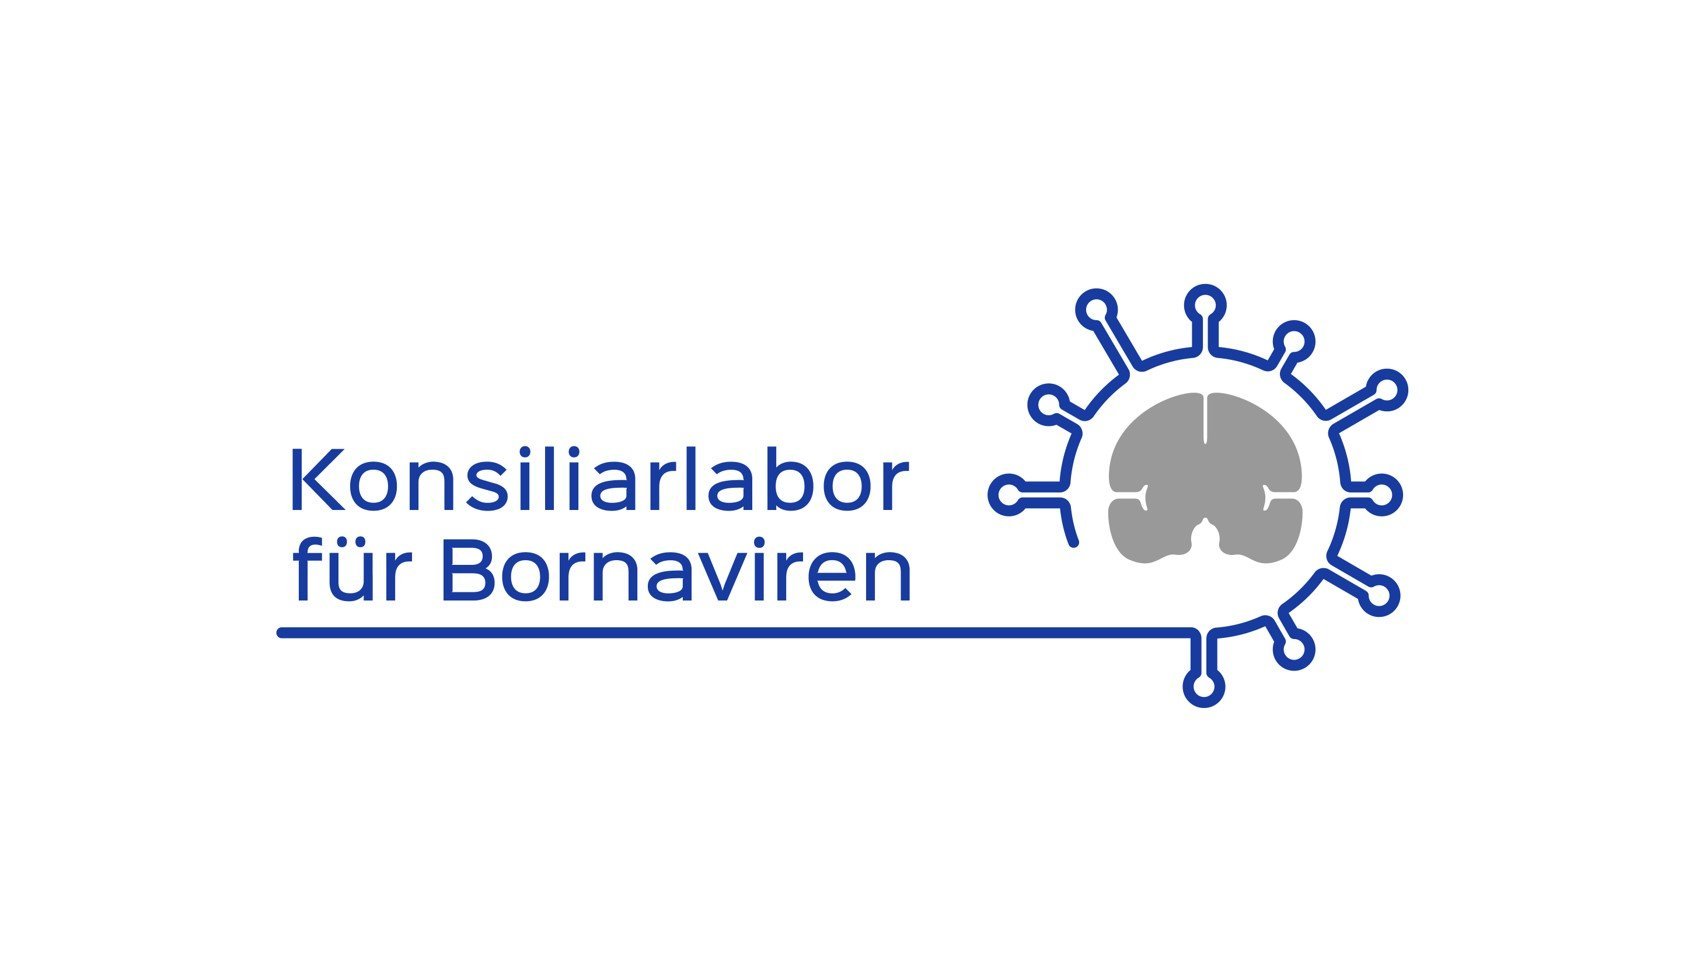 Logo Bornaviruses Consultant Laboratory: In the left part of the logo, the word Konsiliarlabor (Consultant Laboratory) is written in blue, and in a second row it stands for Bornaviruses. Below this is a blue line from which, in the right part of the image, a viral envelope wraps around the schematic grey representation of a brain.